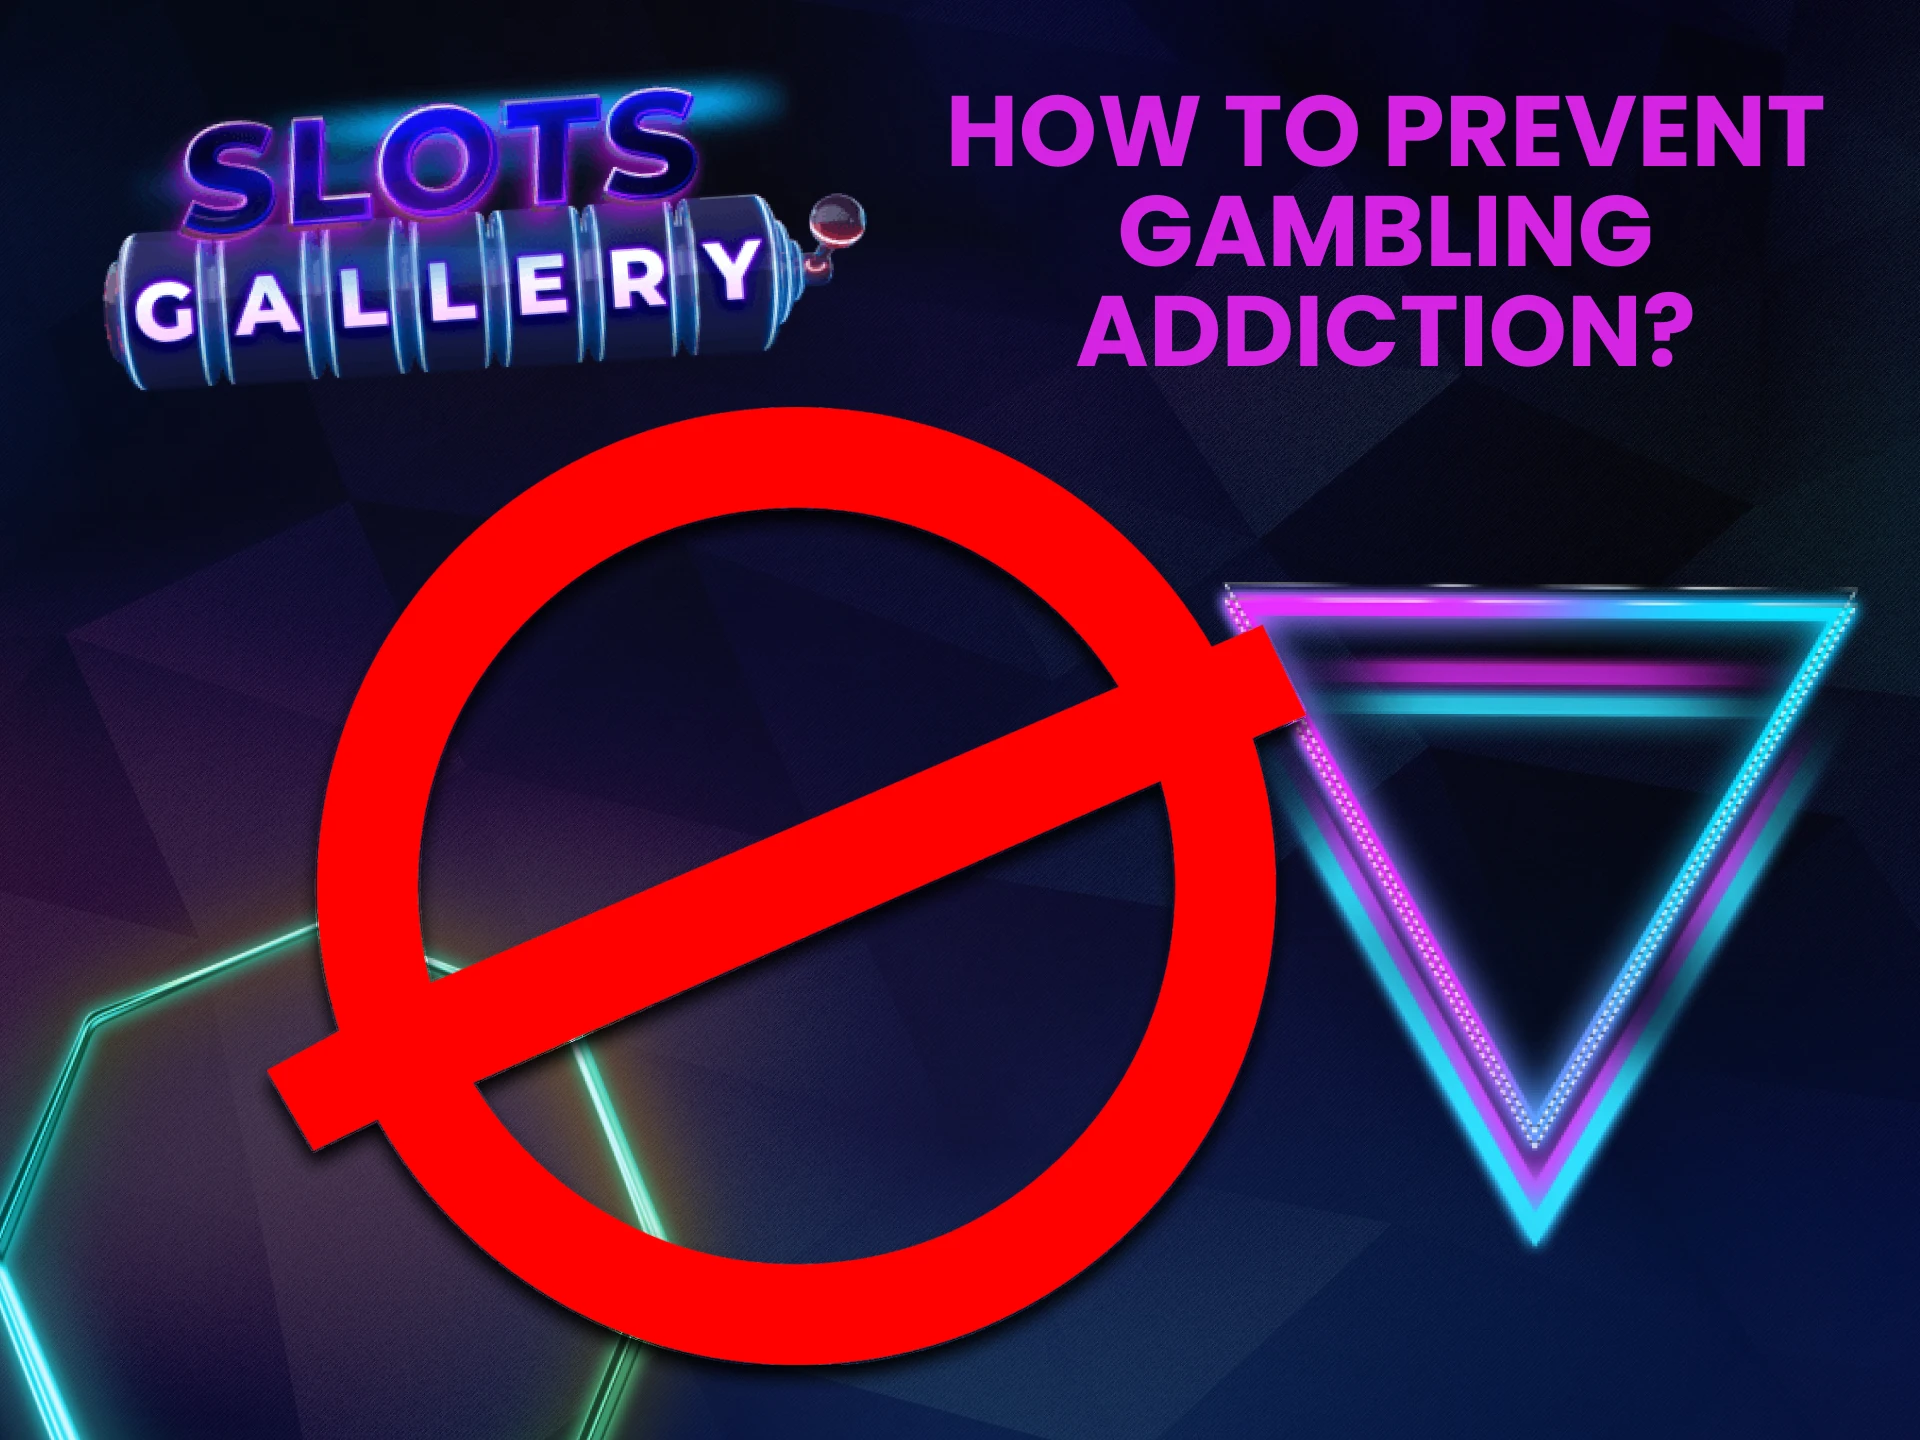 We will tell you how to avoid becoming addicted to gambling on the Slots Gallery website.